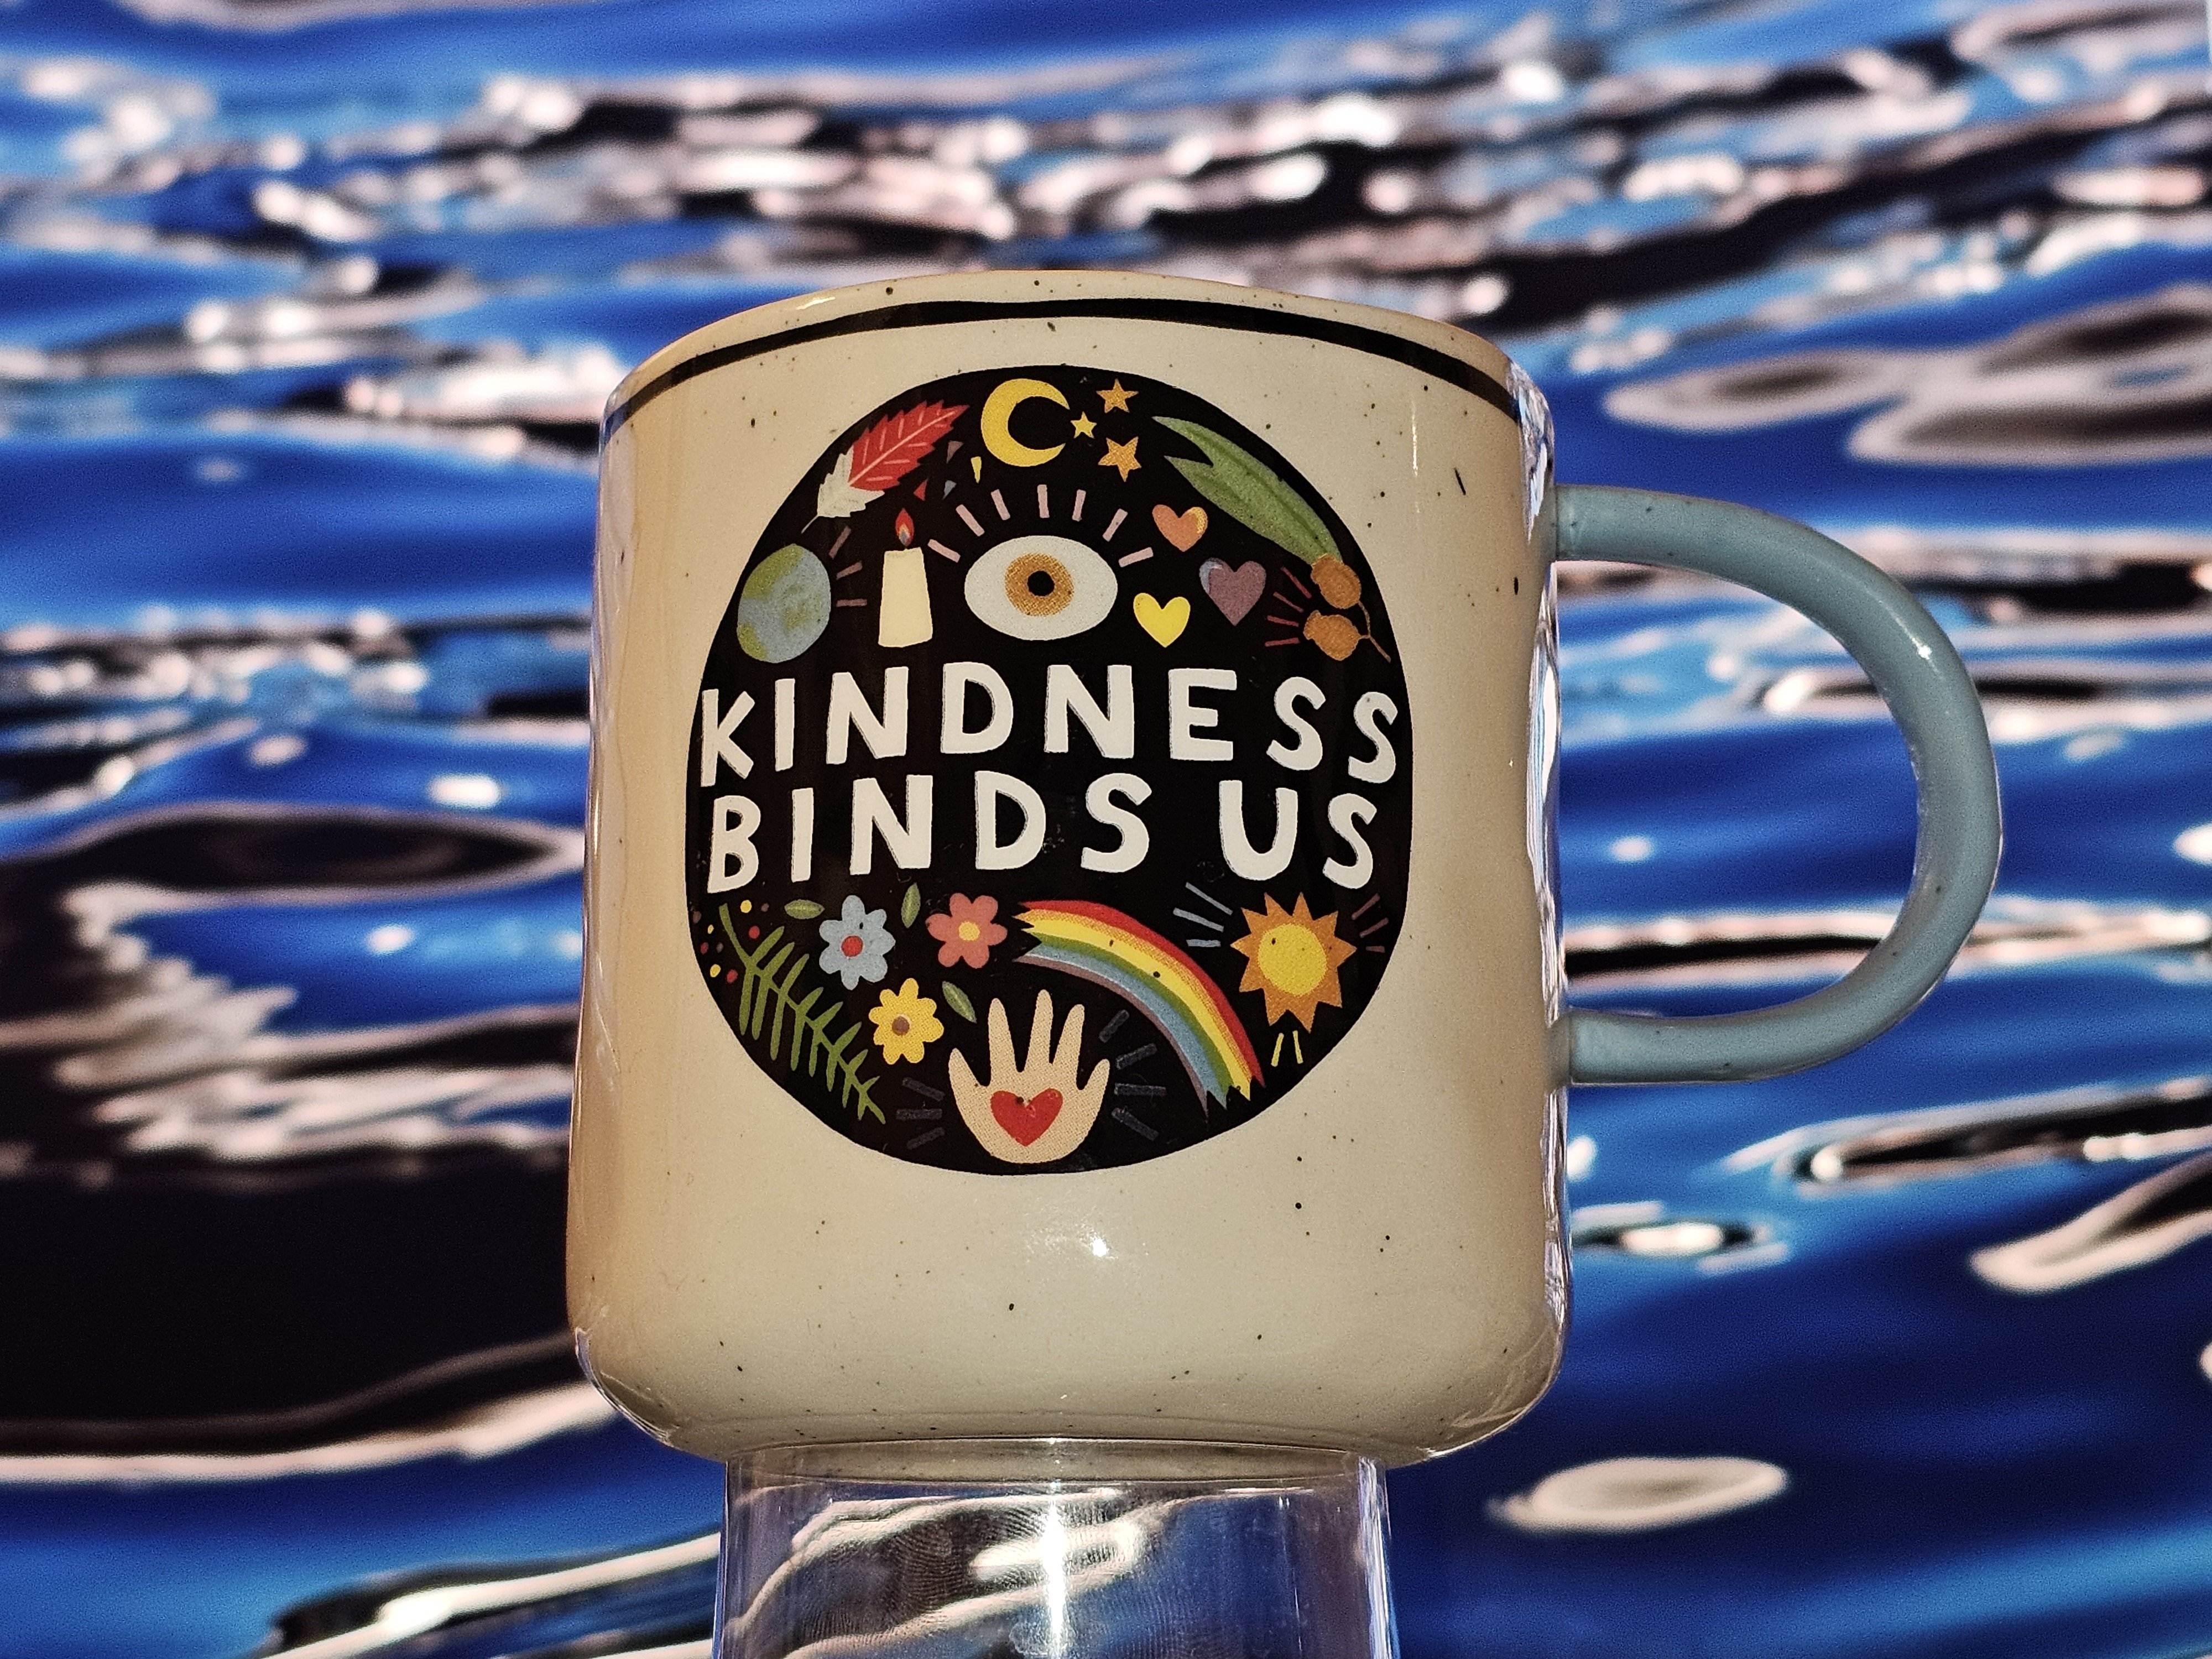 Photograph of a mug which reads 'KINDNESS BINDS US'